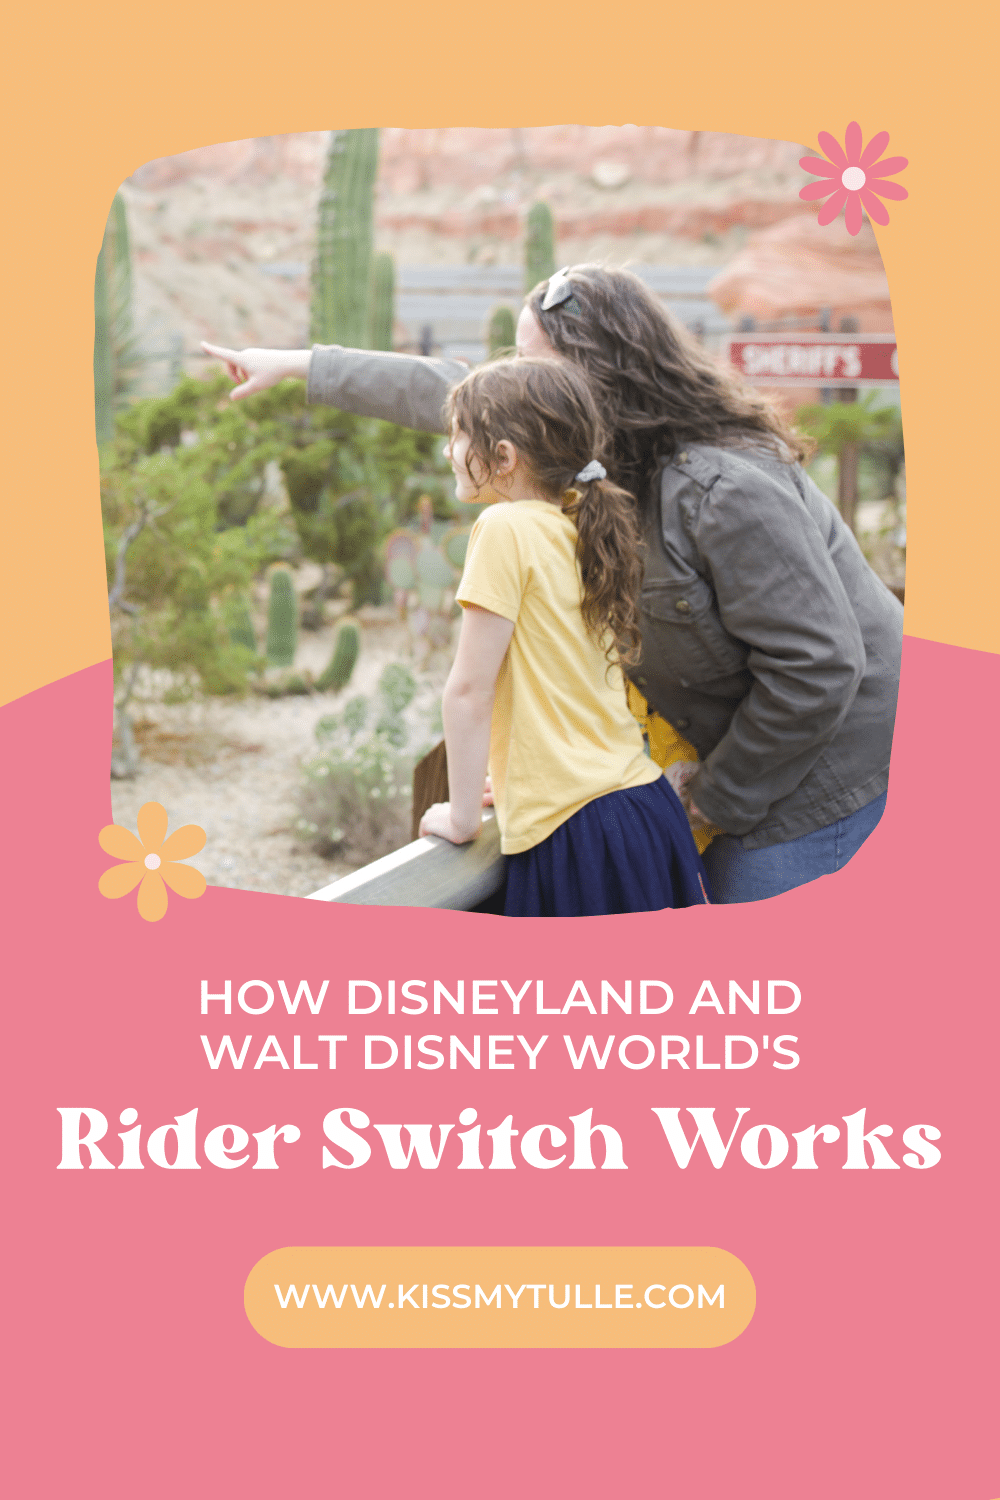 My family has been going to Disneyland and Walt Disney World for years. During that time, we discovered that Rider Switch is a fantastic way to get the most bang for your Disney buck! Here's how it works at Disneyland and at Walt Disney World!